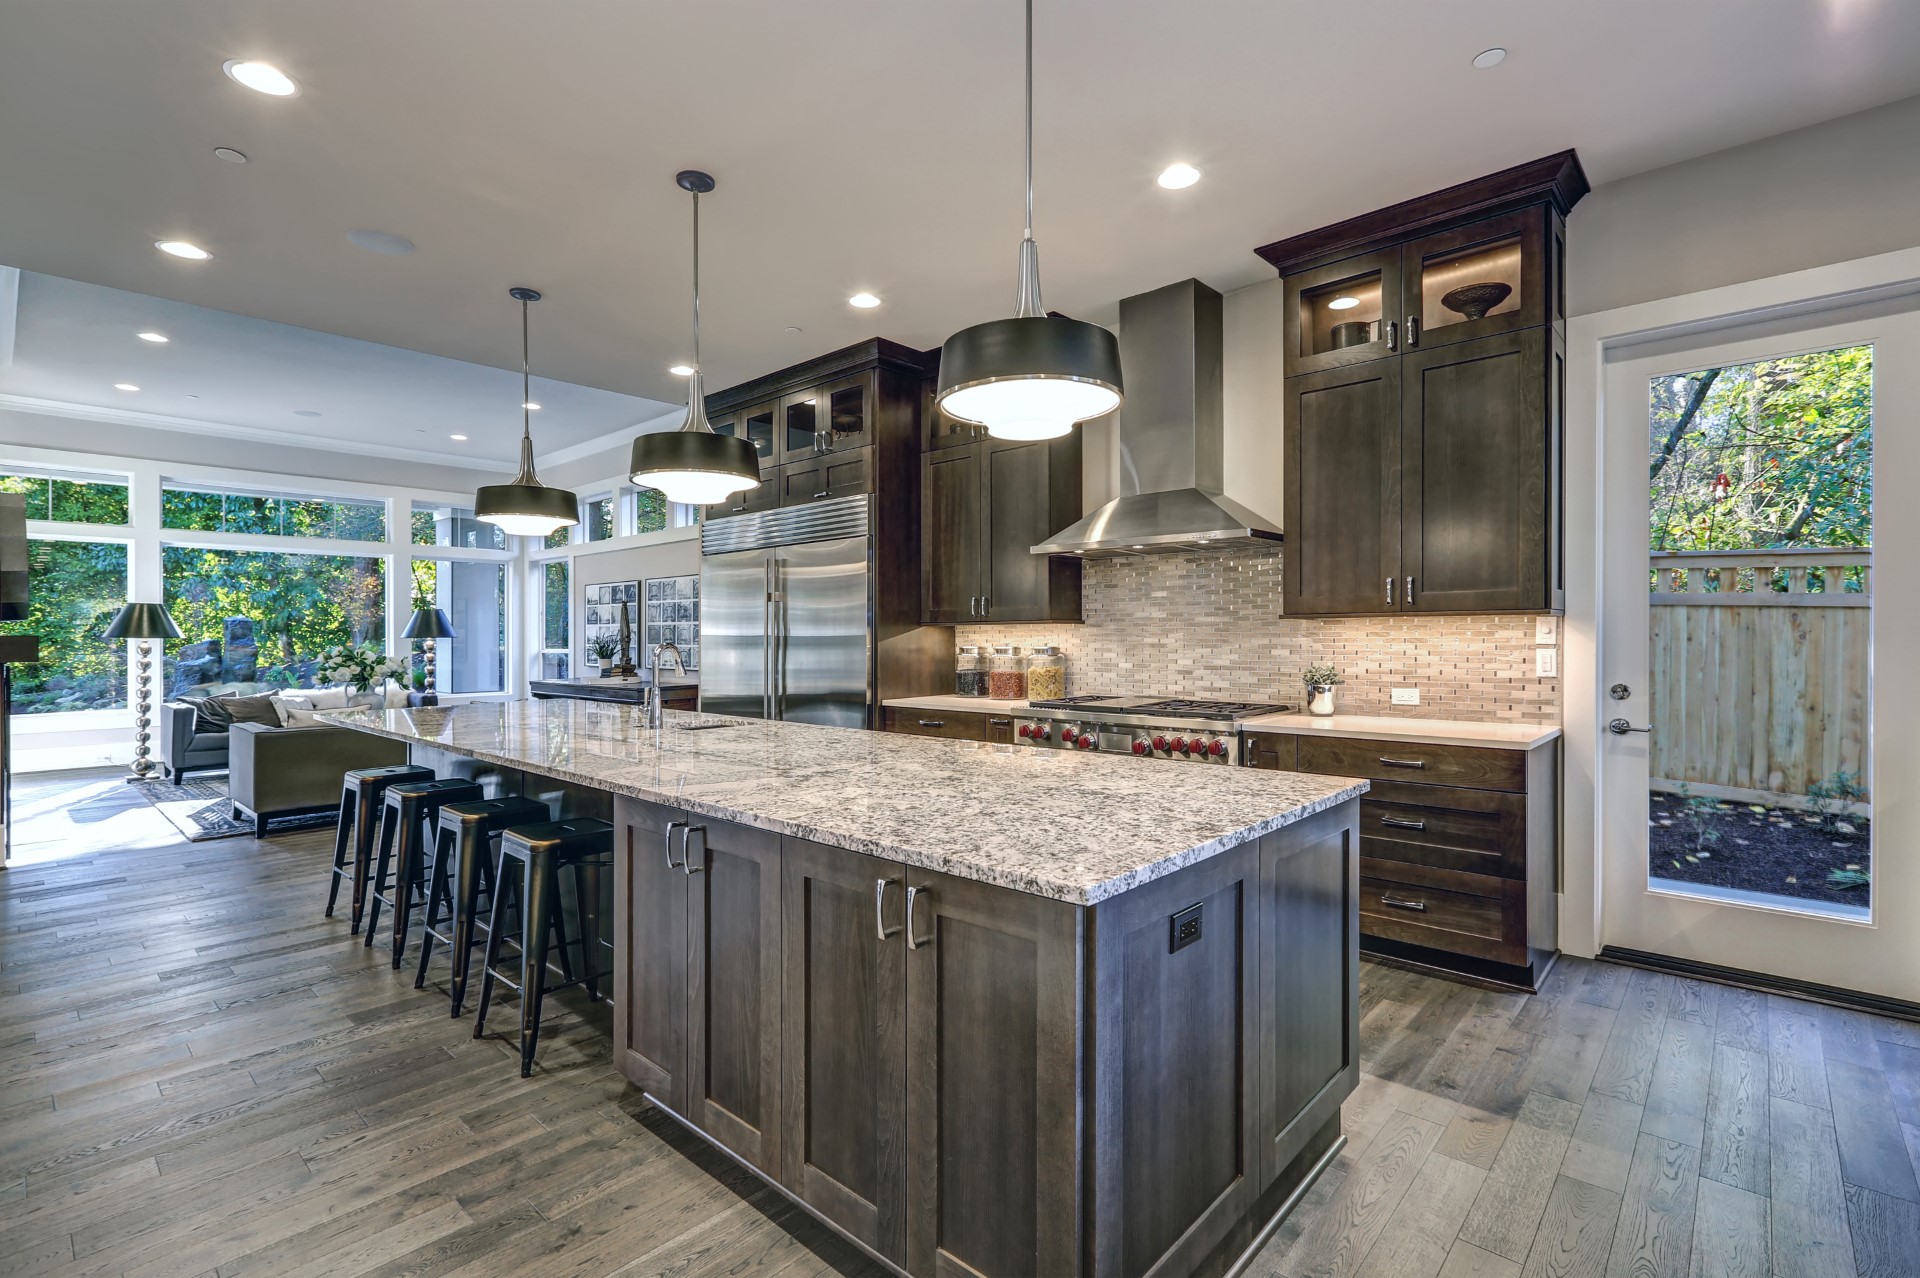 A kitchen with adequate lighting is crucial to any dark colors. When you carefully space recessed lights to optimize the luminescence of your kitchen, it starts to become hypnagogic as nature fills the atmosphere of this peaceful area.